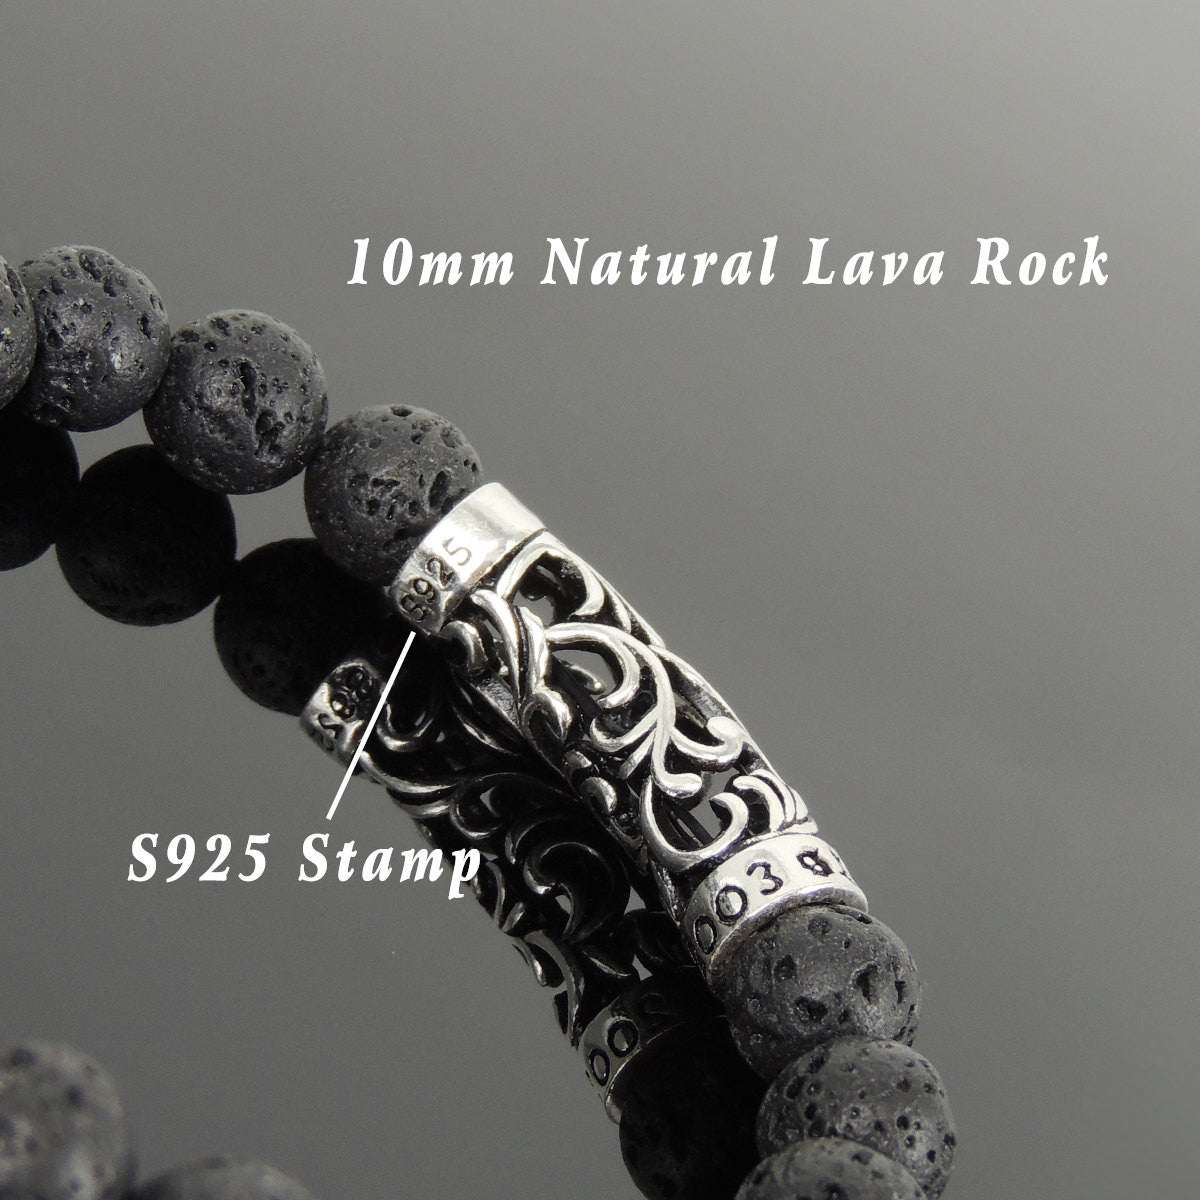 10mm Lava Rock Healing Stone Bracelet with S925 Sterling Silver Celtic Charm - Handmade by Gem & Silver BR945